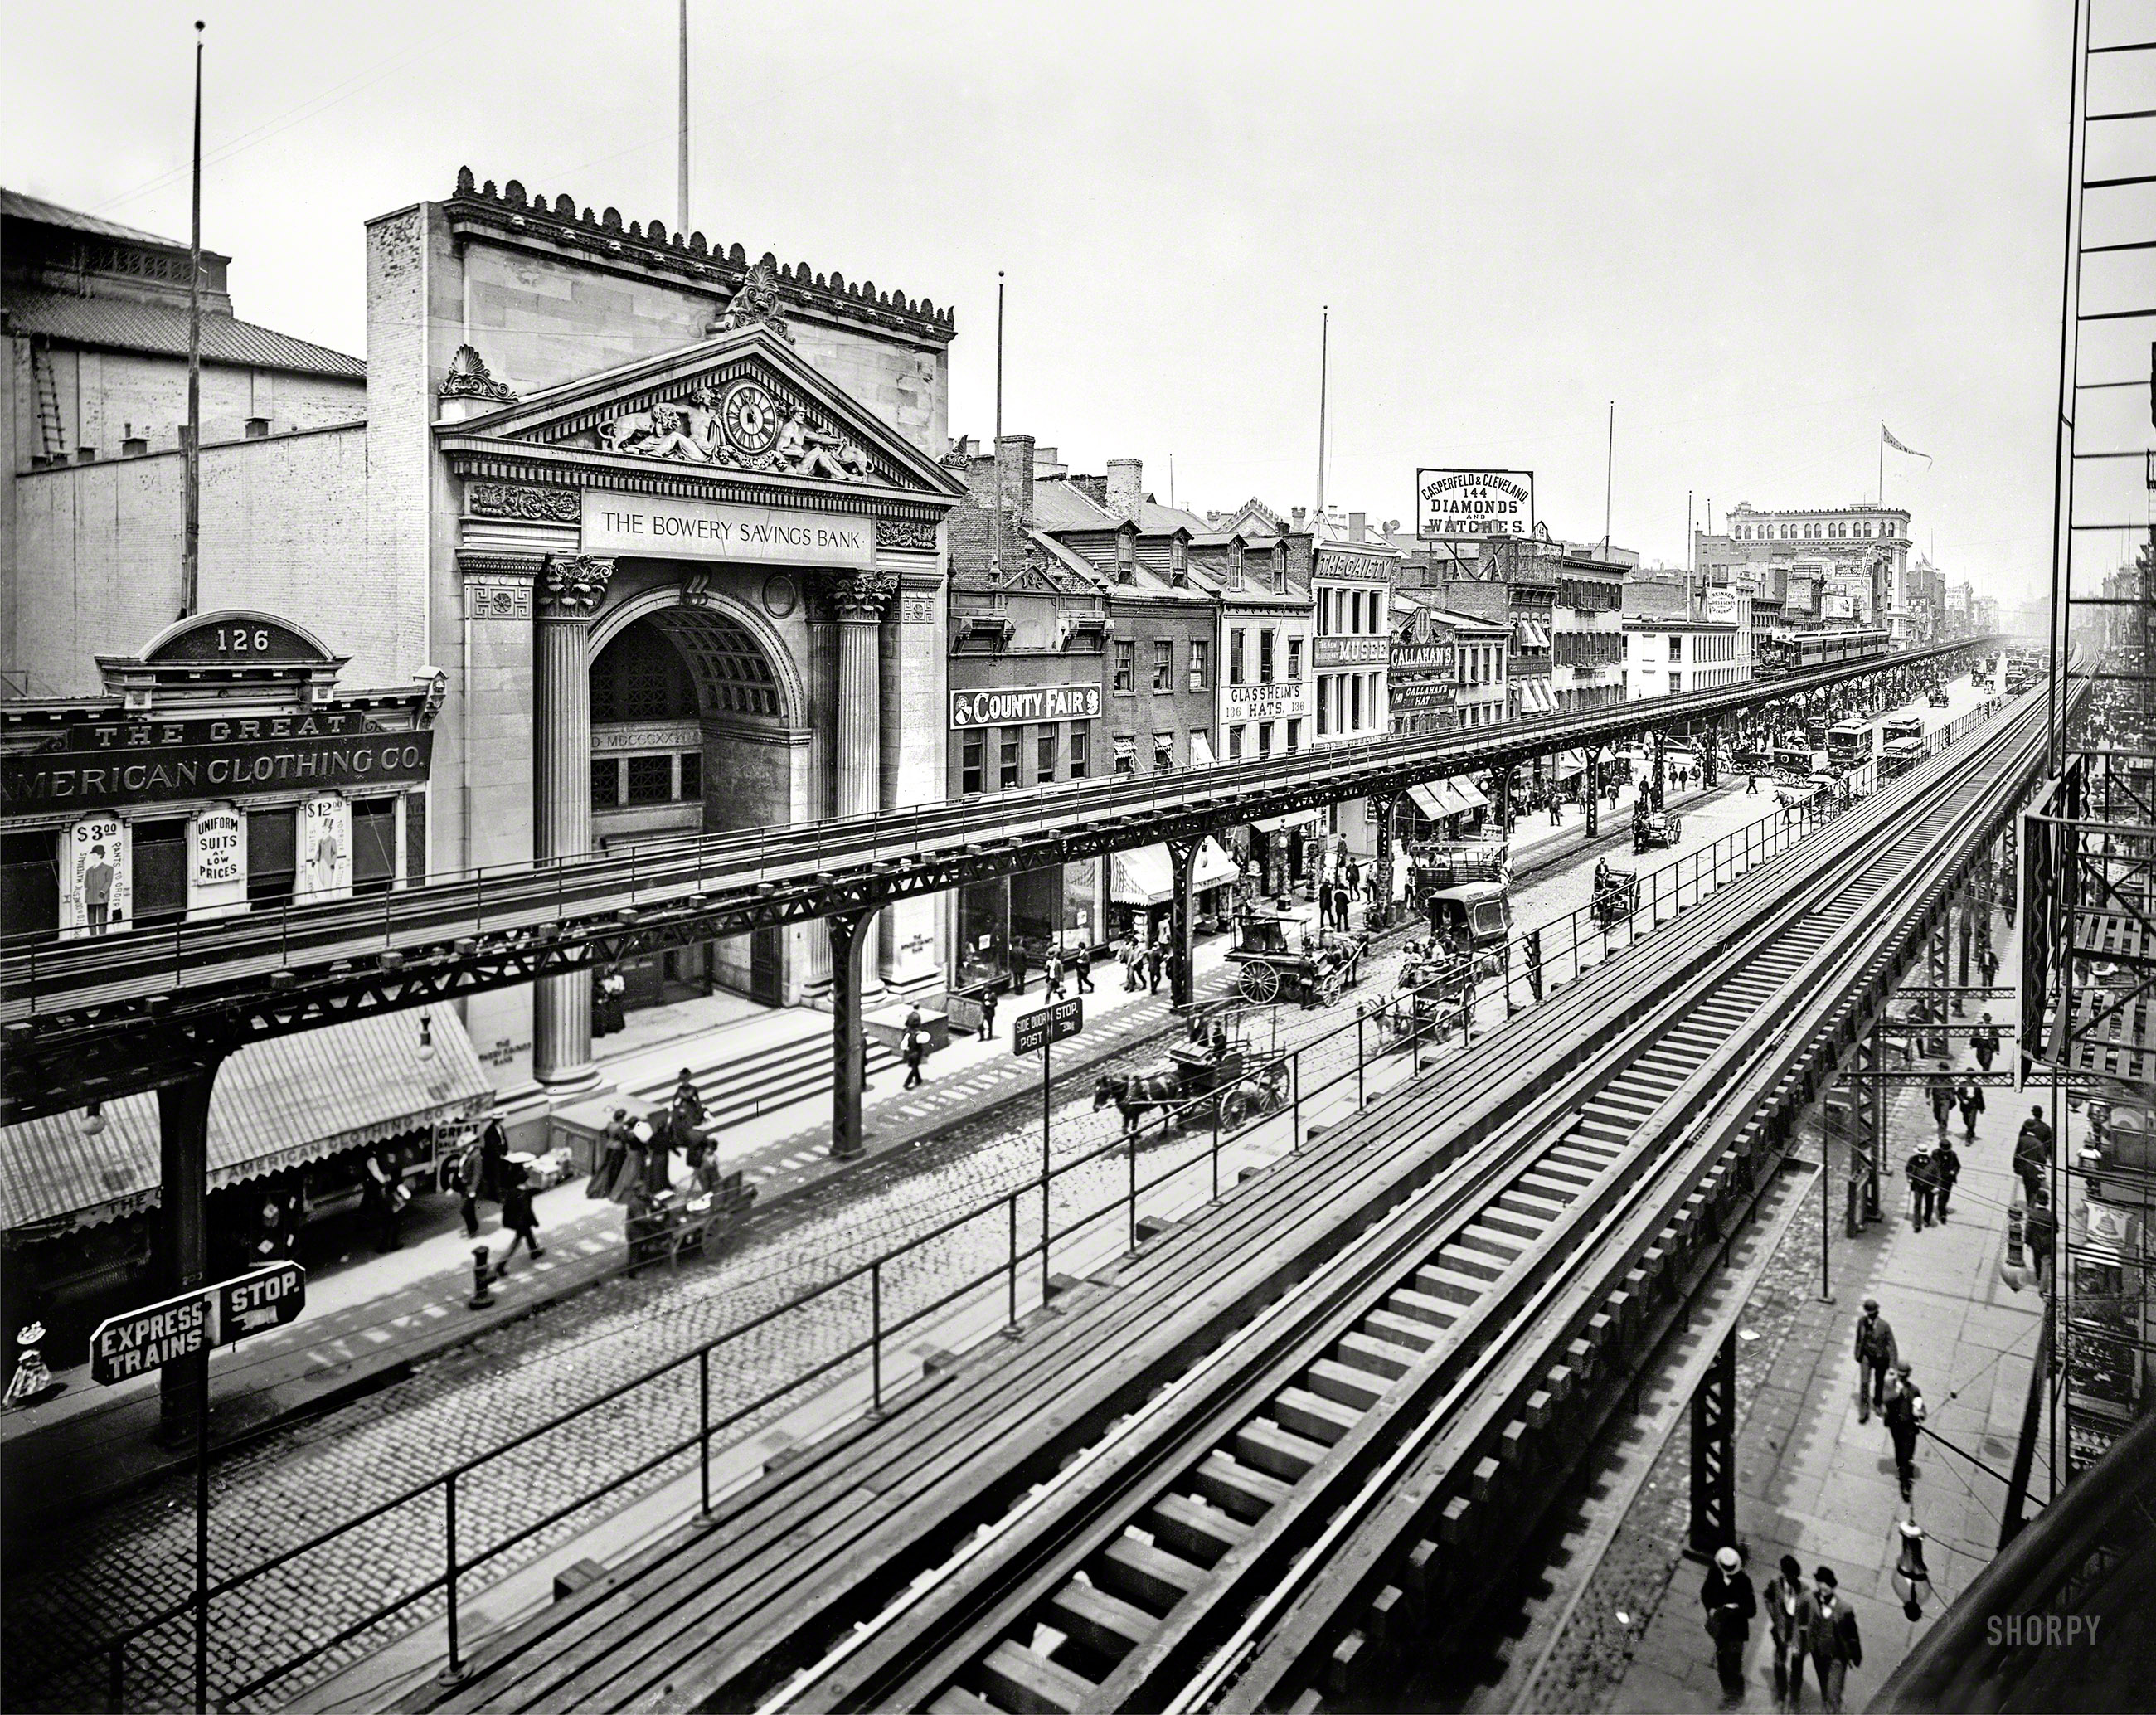 Manhattan circa 1900. "The Bowery, New York." The tracks of the Third Avenue El passing the Bowery Savings Bank. 8x10 inch glass negative. View full size.